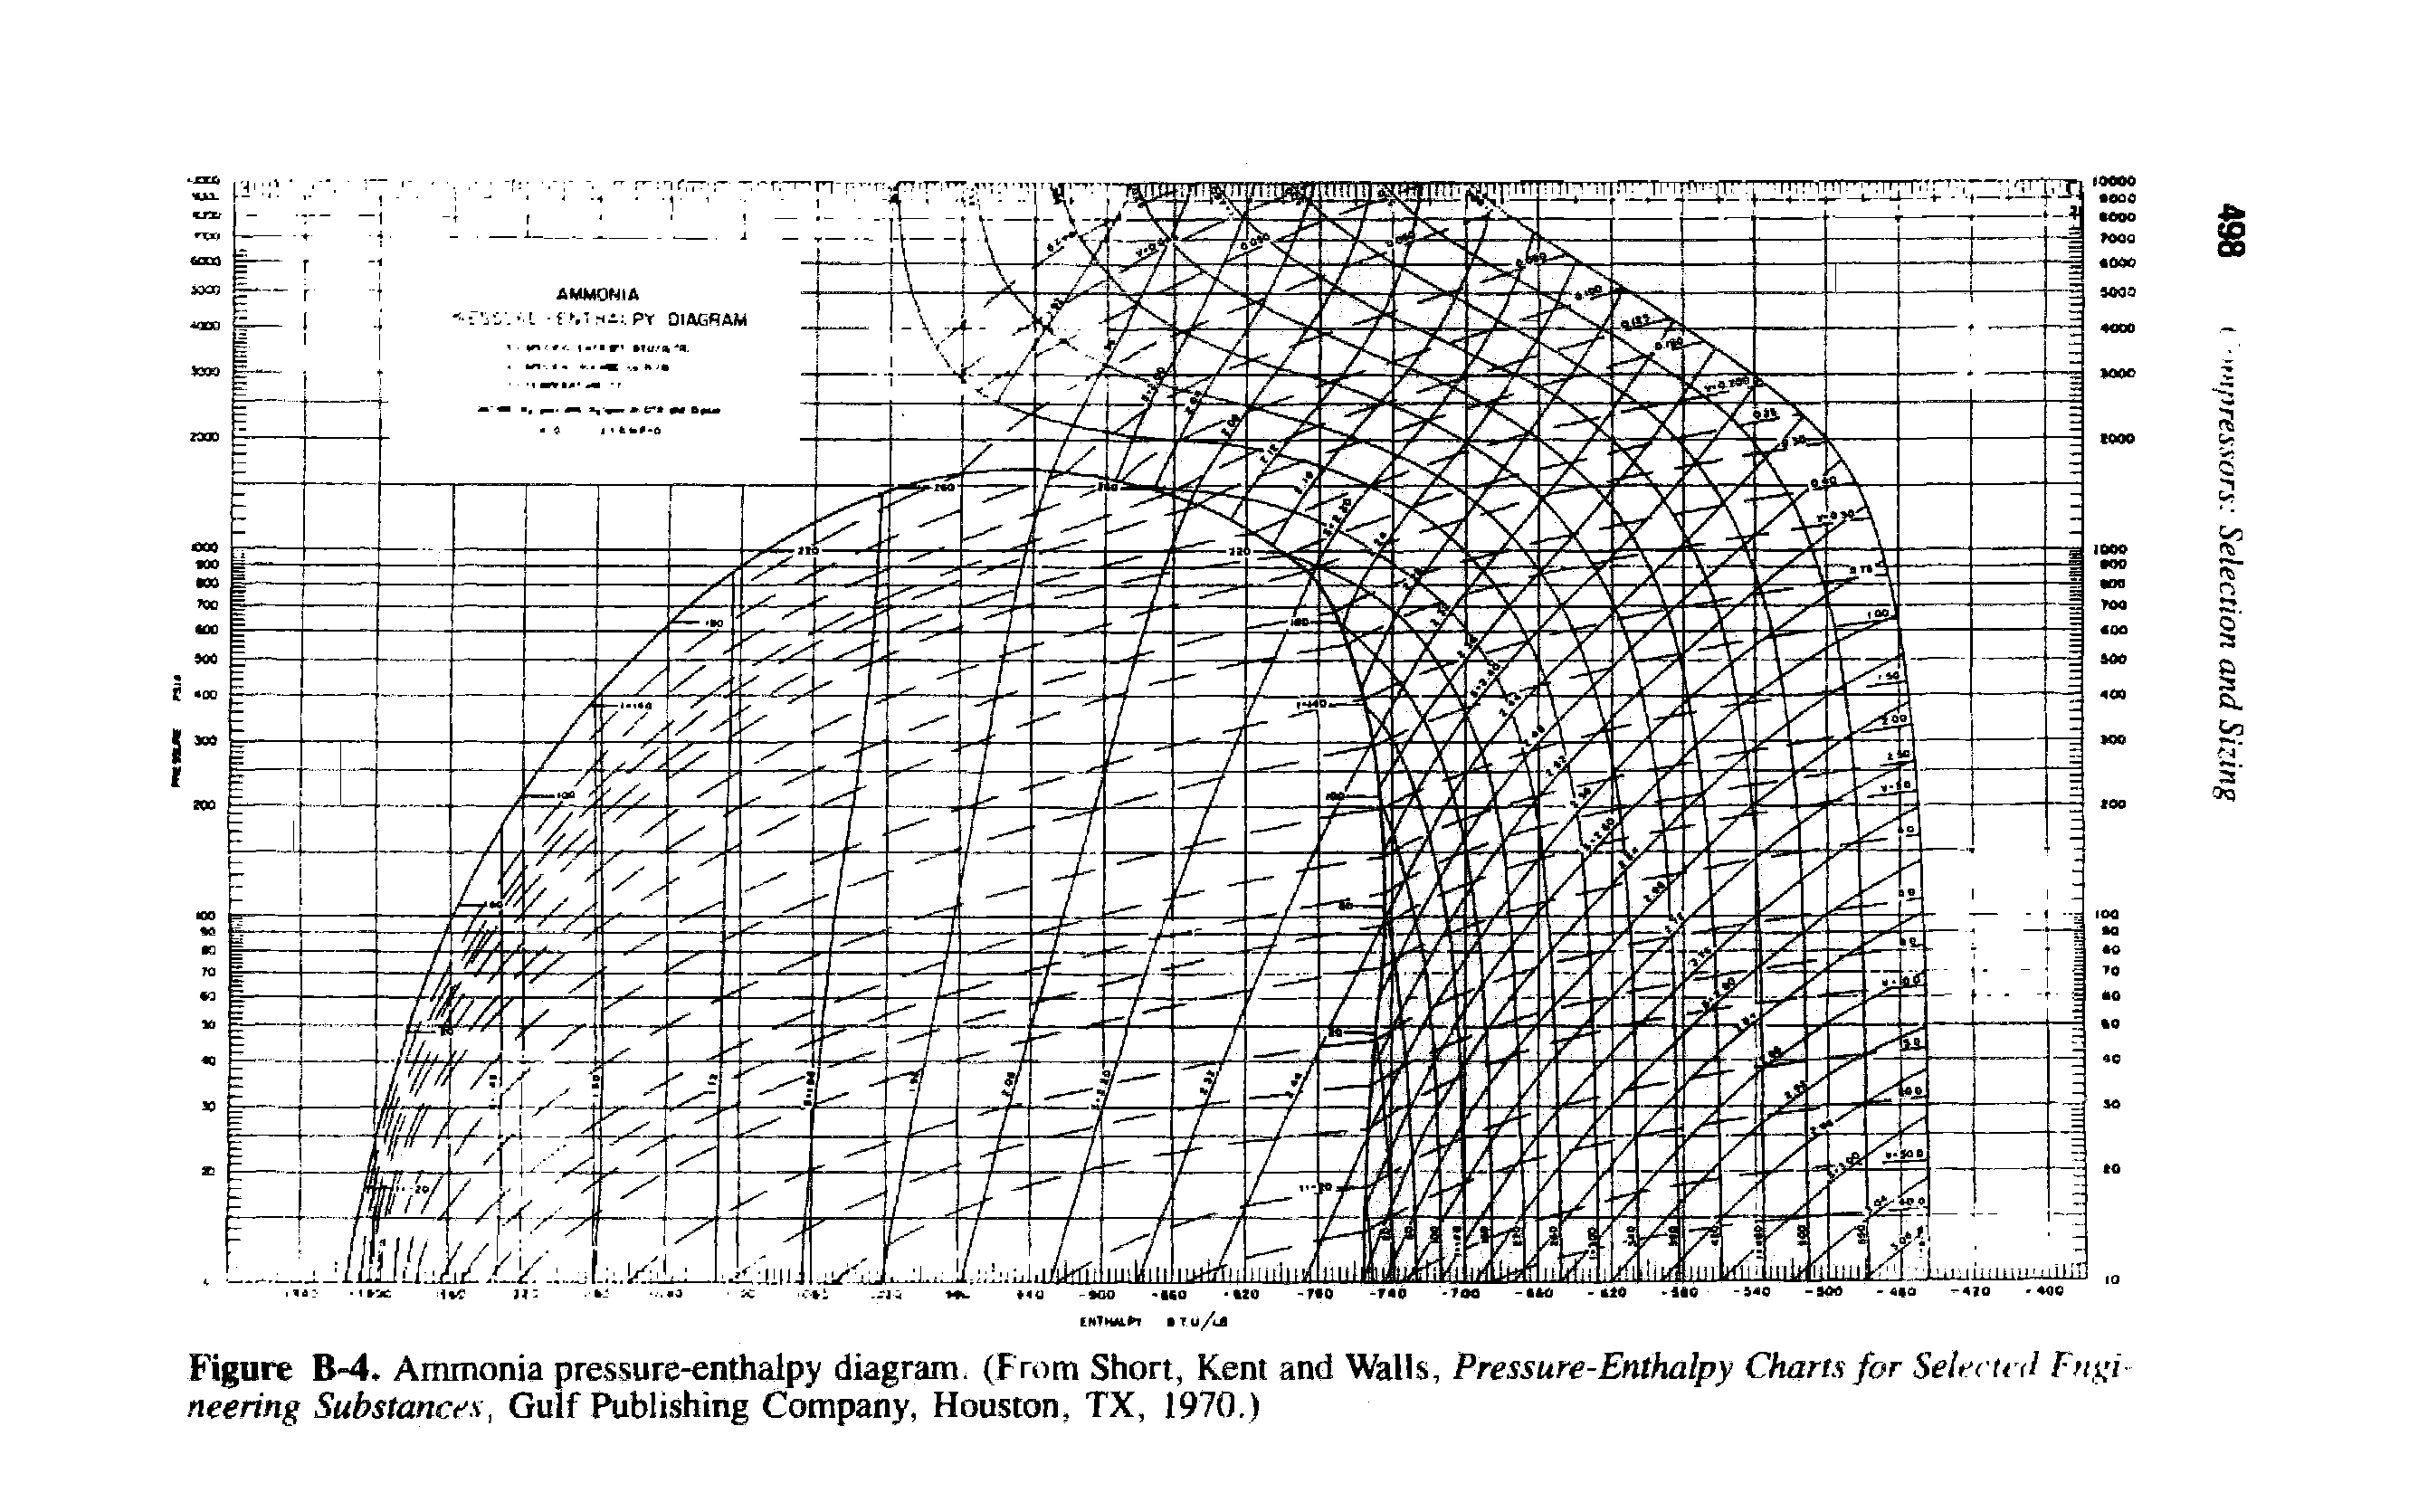 Figure B-4. Ammonia pressure-enthalpy diagram. (From Short, Kent and Walls, Pressure-Enthalpy Charts for Selected Fn i neering Substances, Gulf Publishing Company, Houston, TX, 1970.)...